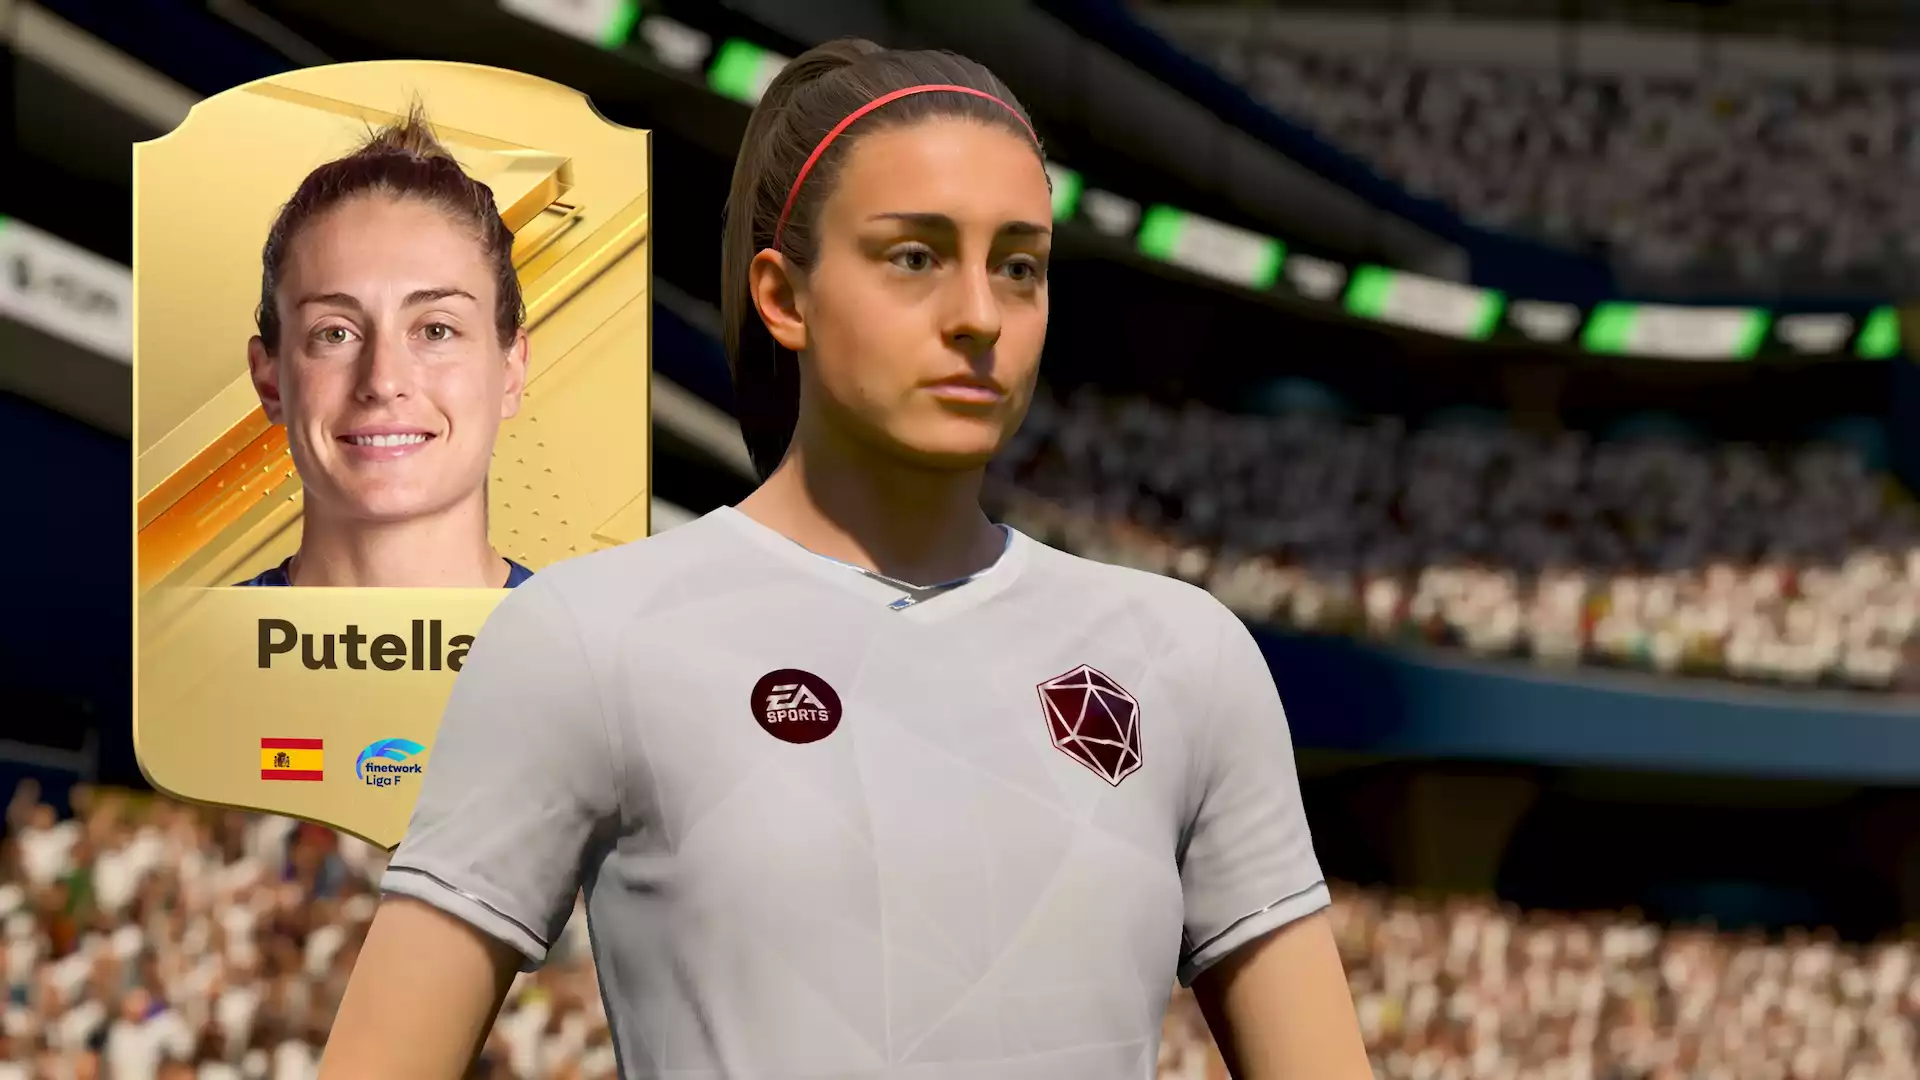 EASFC 24 Ultimate Team new card design: Animated backgrounds & confirmed card types so far